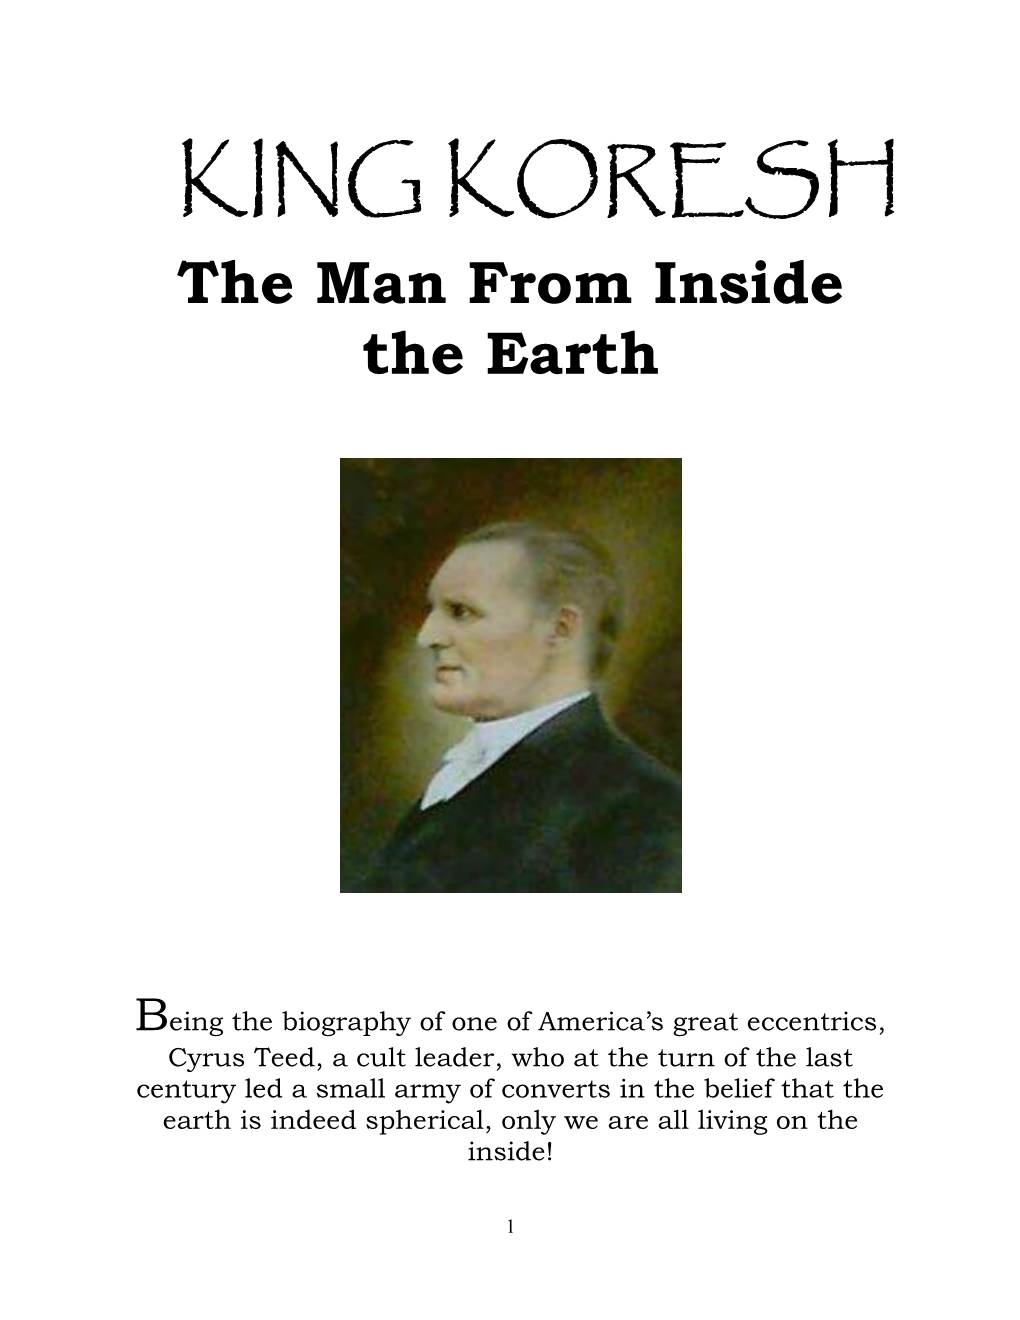 KING KORESH the Man from Inside the Earth